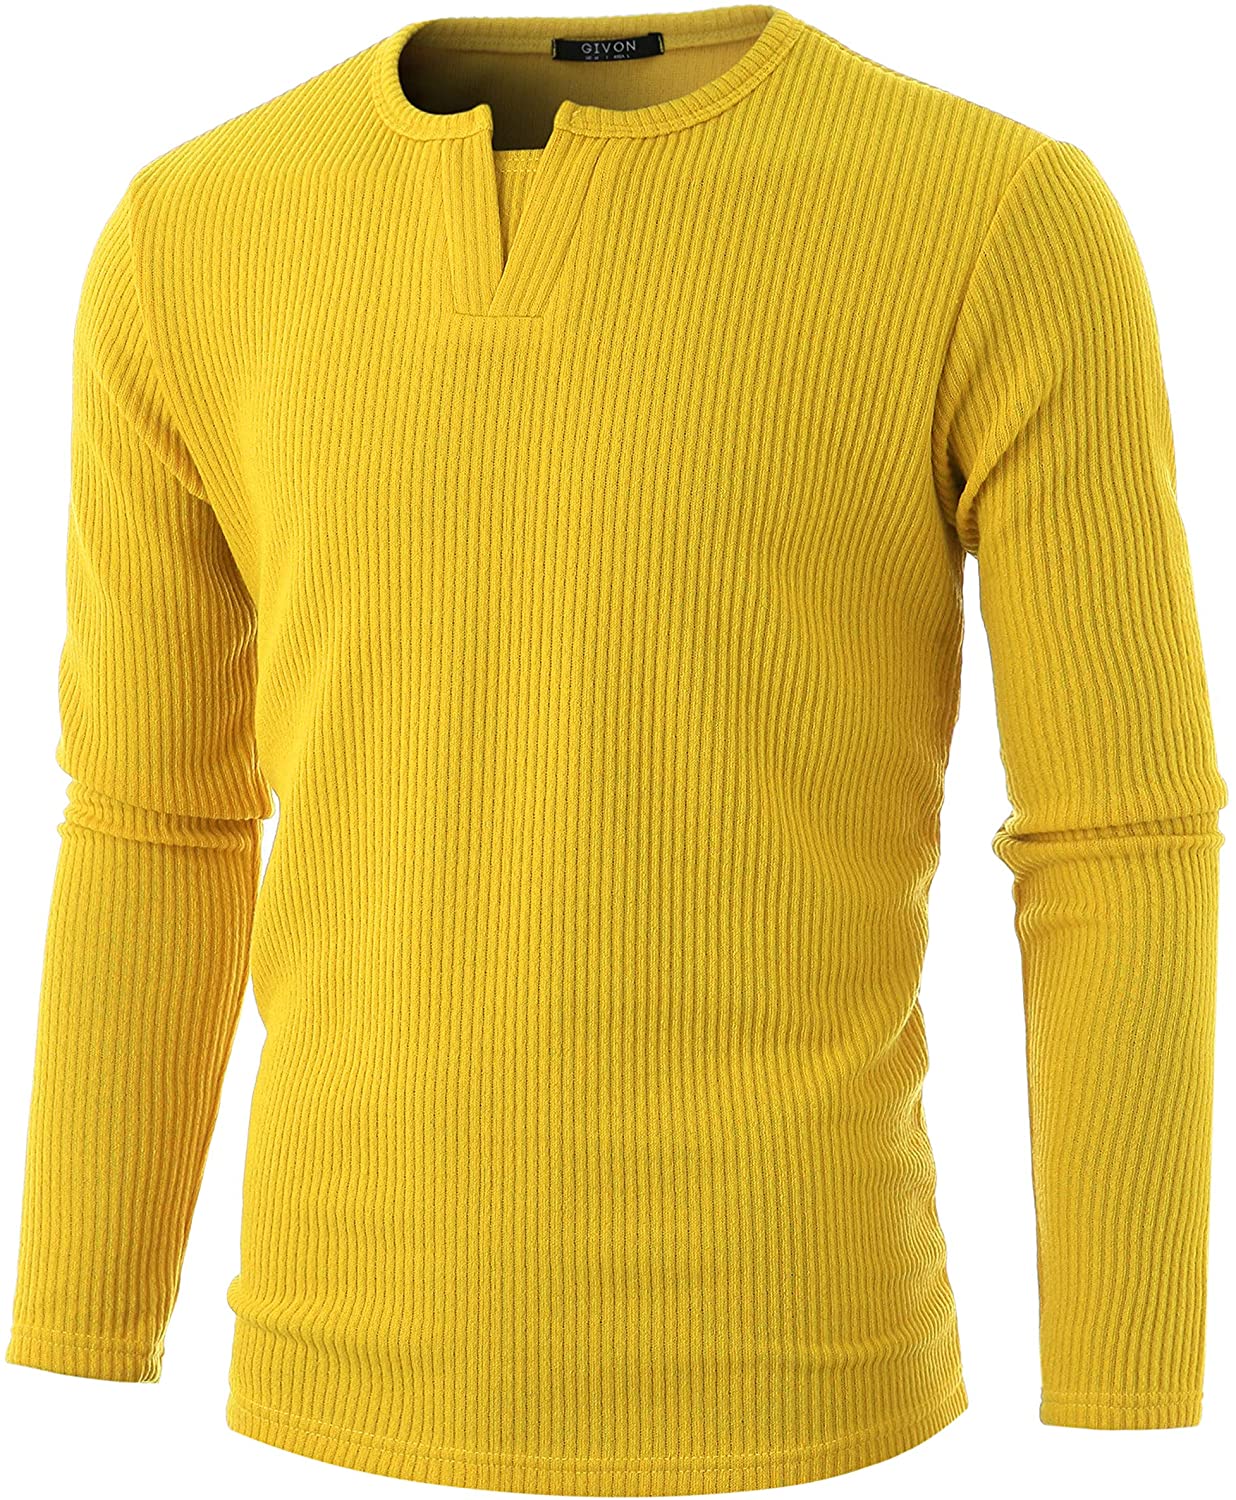 GIVON Mens Slim Fit Long Sleeve Soft Blend Henley Y-Neck Pullover Sweater